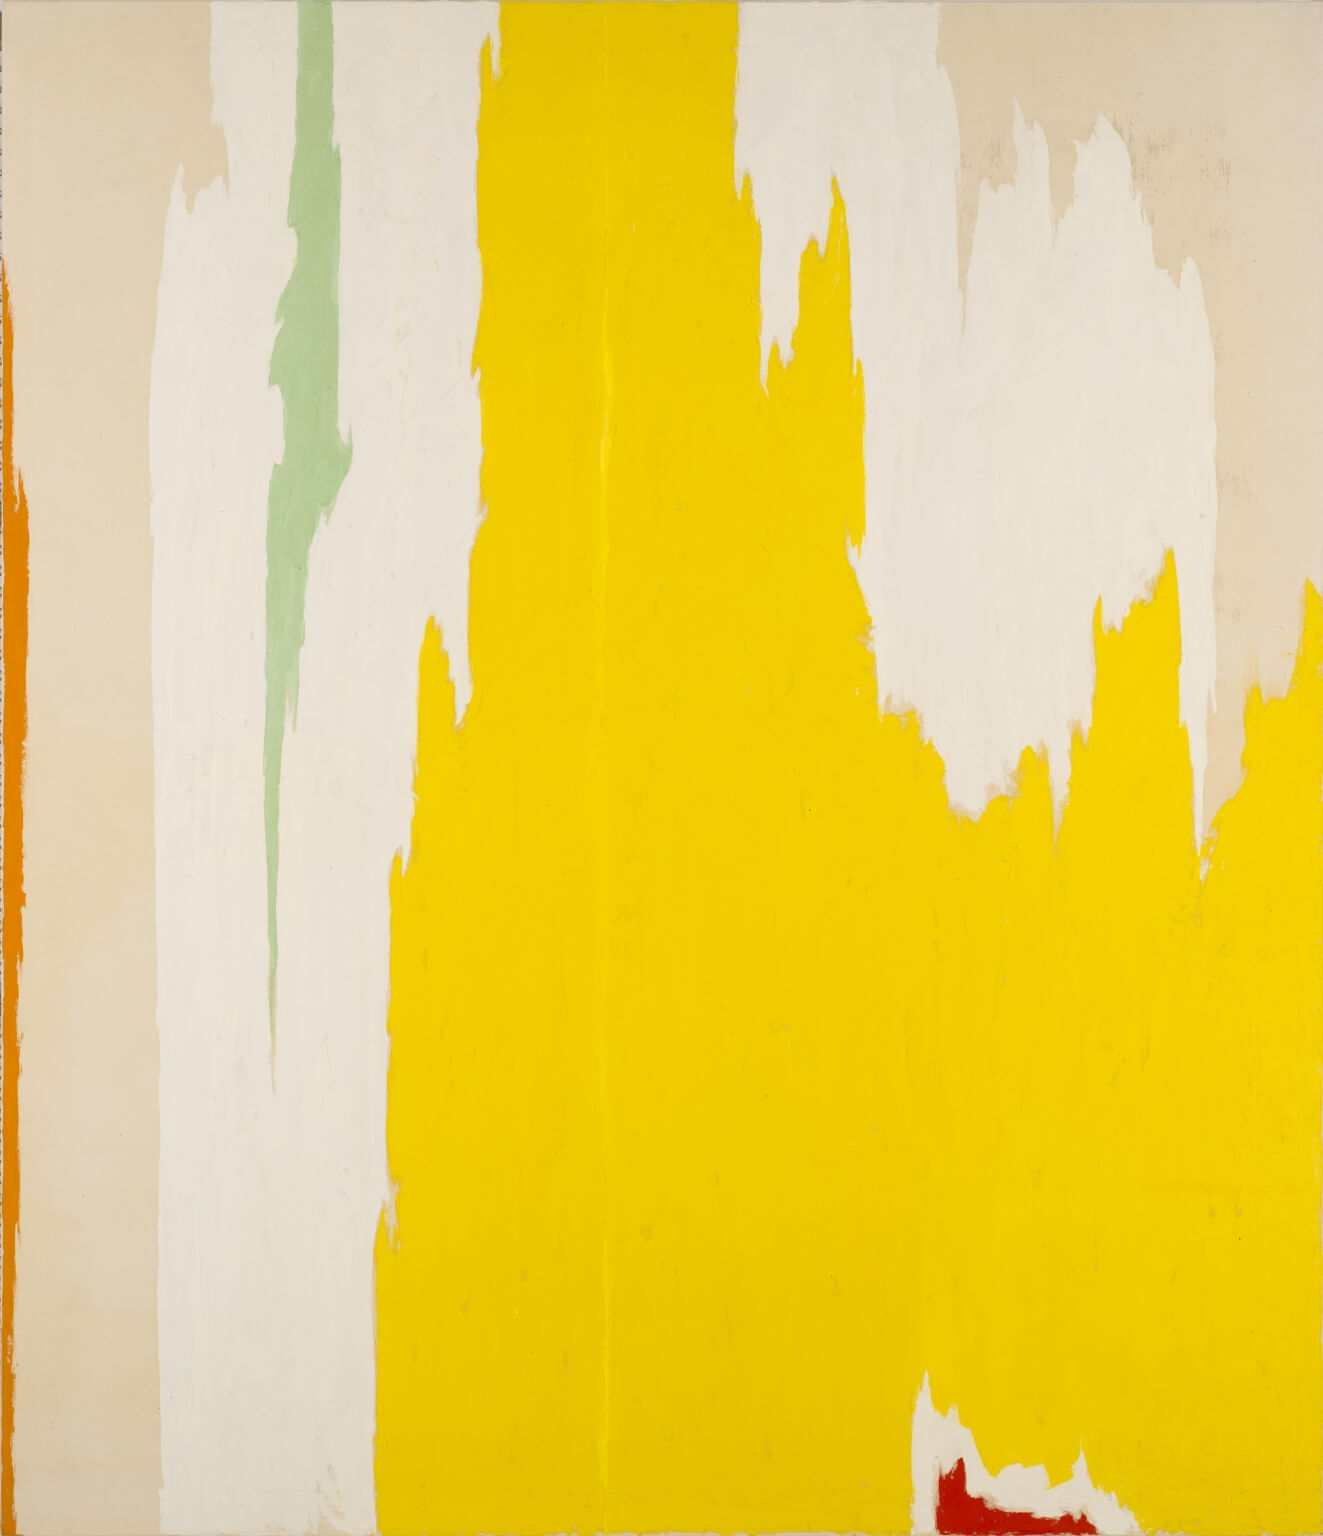 Abstract oil painting with bare canvas showing on the left and upper right sides, with a large section of yellow, a little white around it, and orange and green vertical lines, with a small red area at the bottom